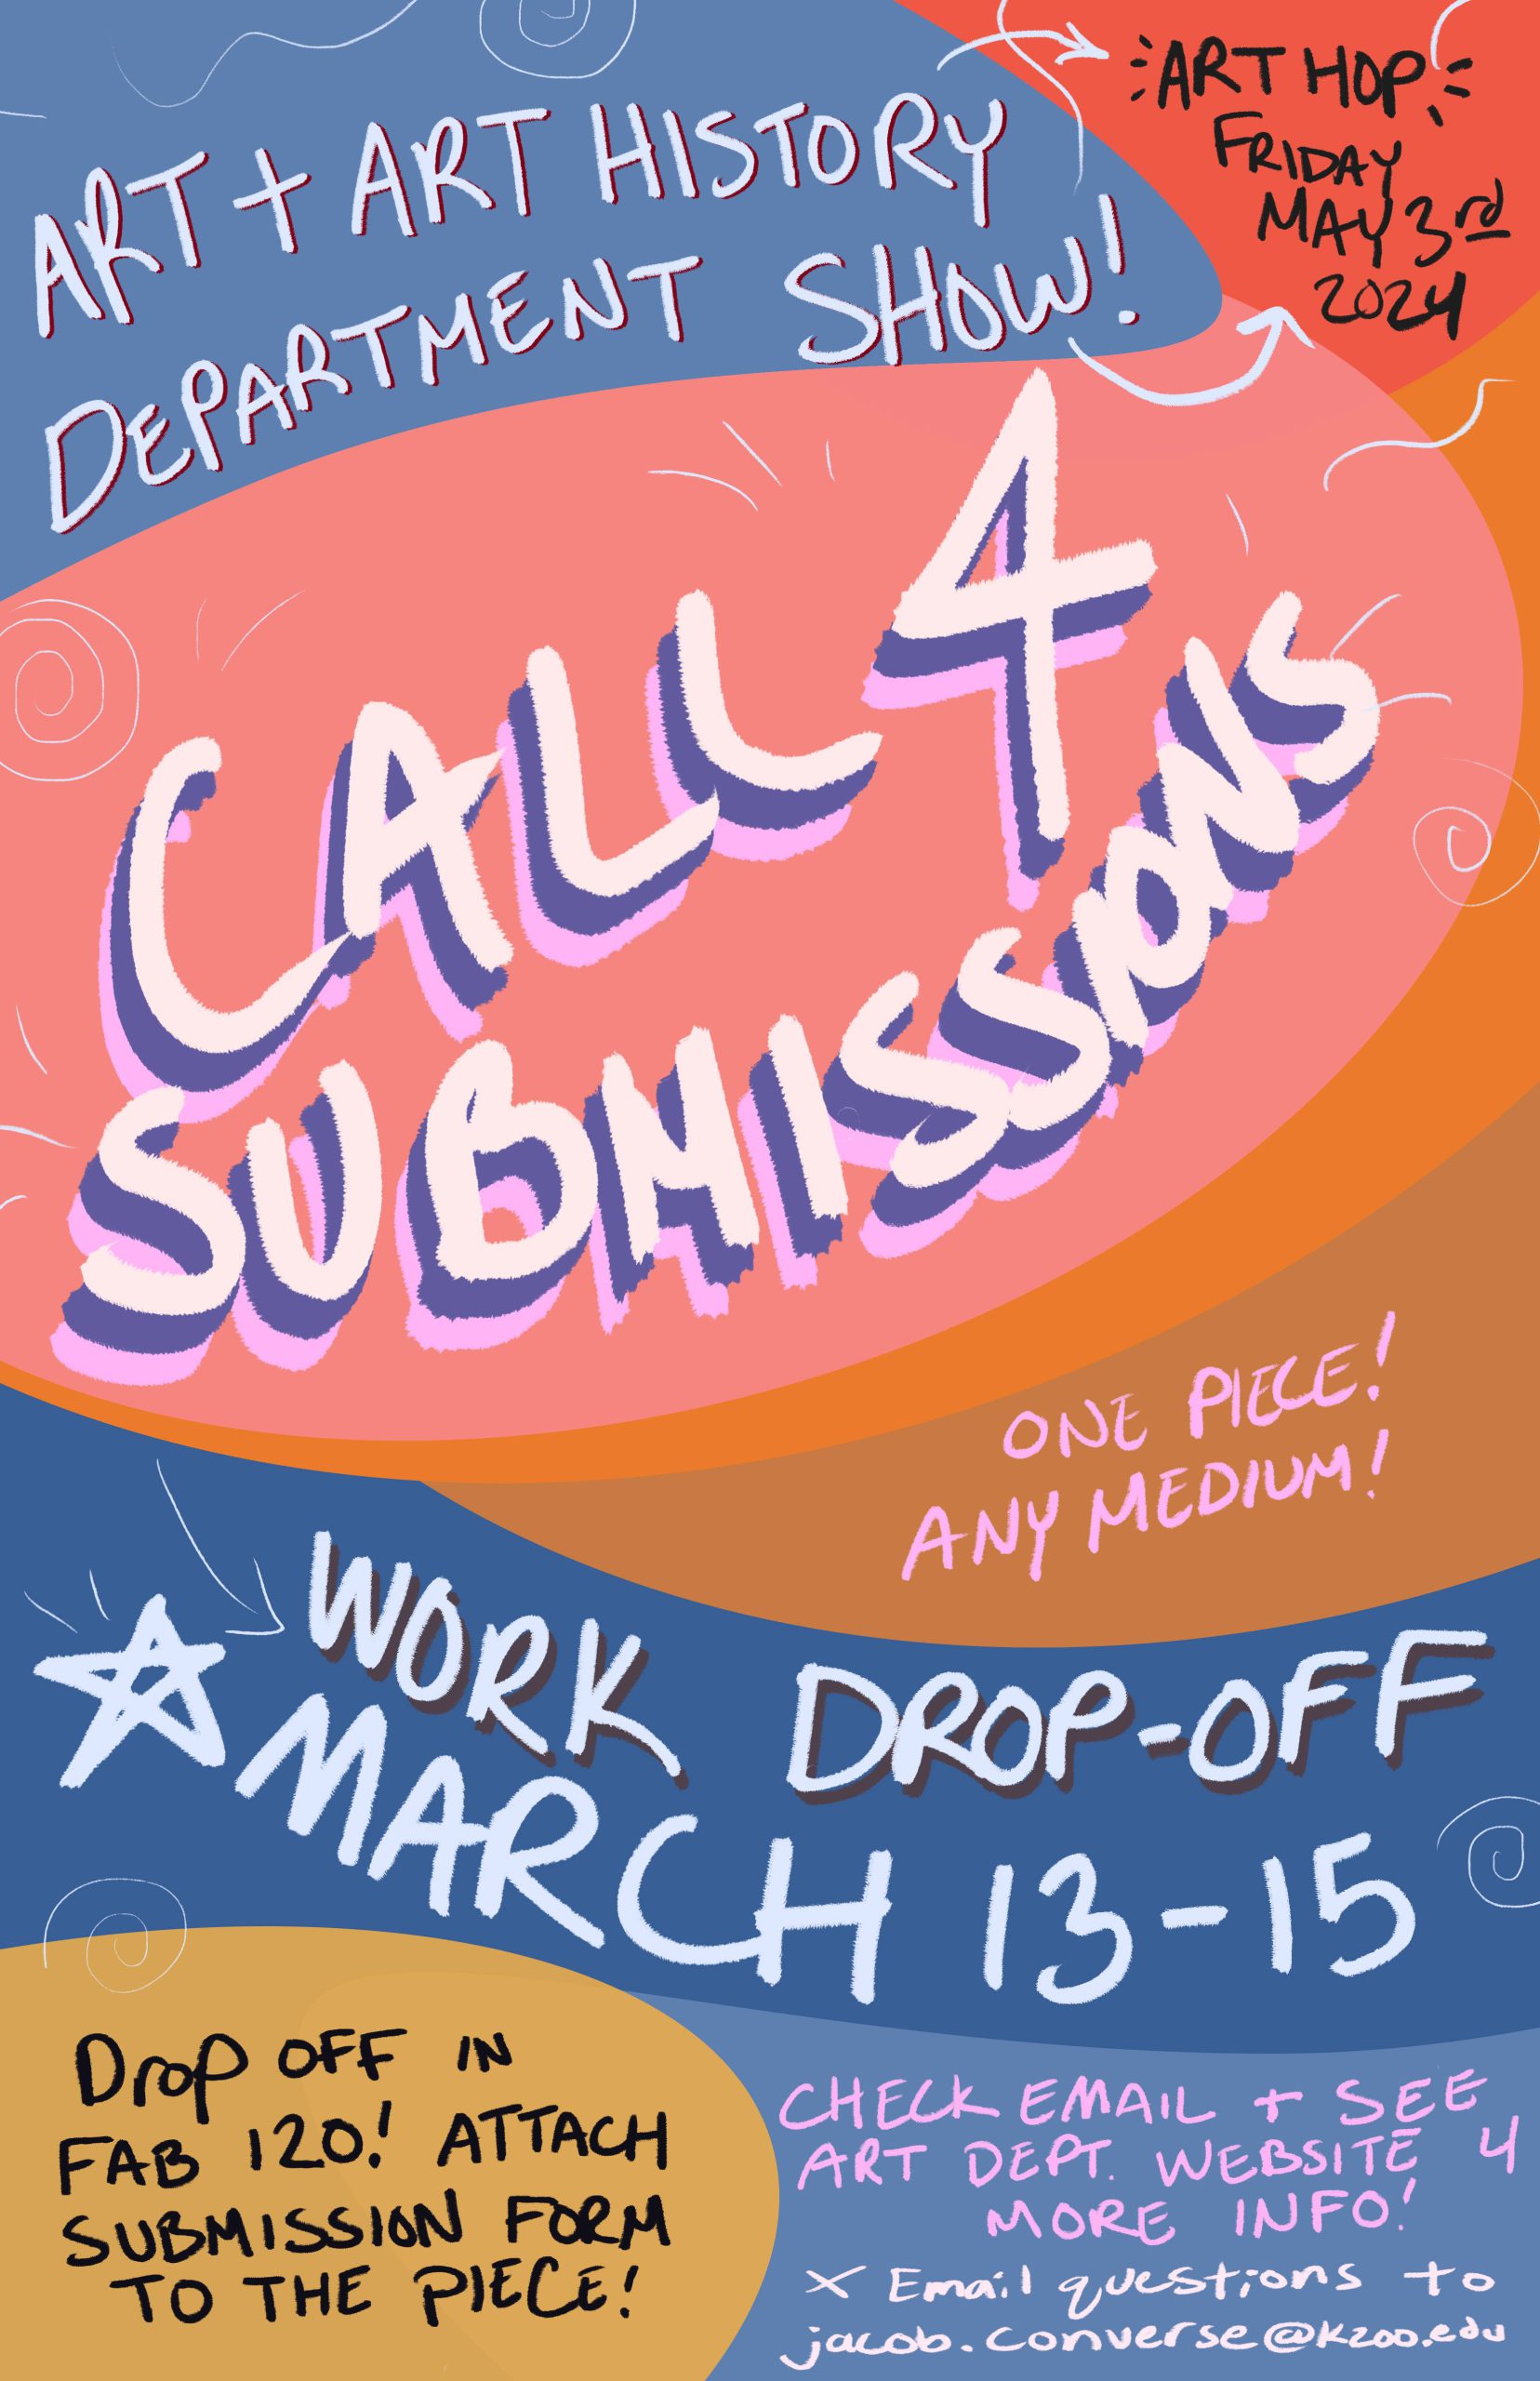 Call for Submissions: Art & Art History Department Show